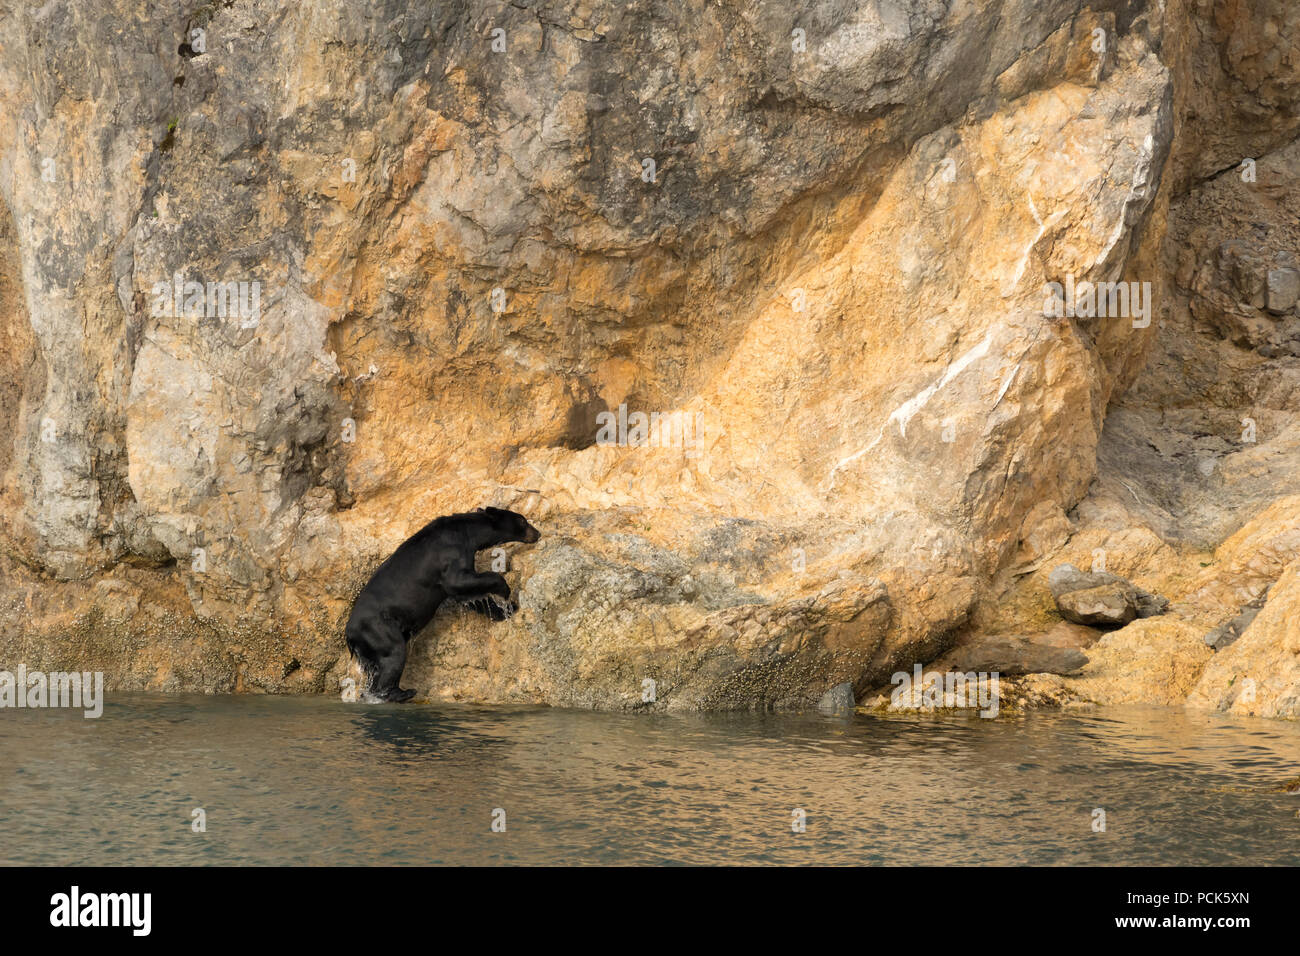 An unsual sight - a Black bear (Ursus americanus) climbing out of the ocean onto a rocky cliff in Alaska on an unusually hot day. Stock Photo